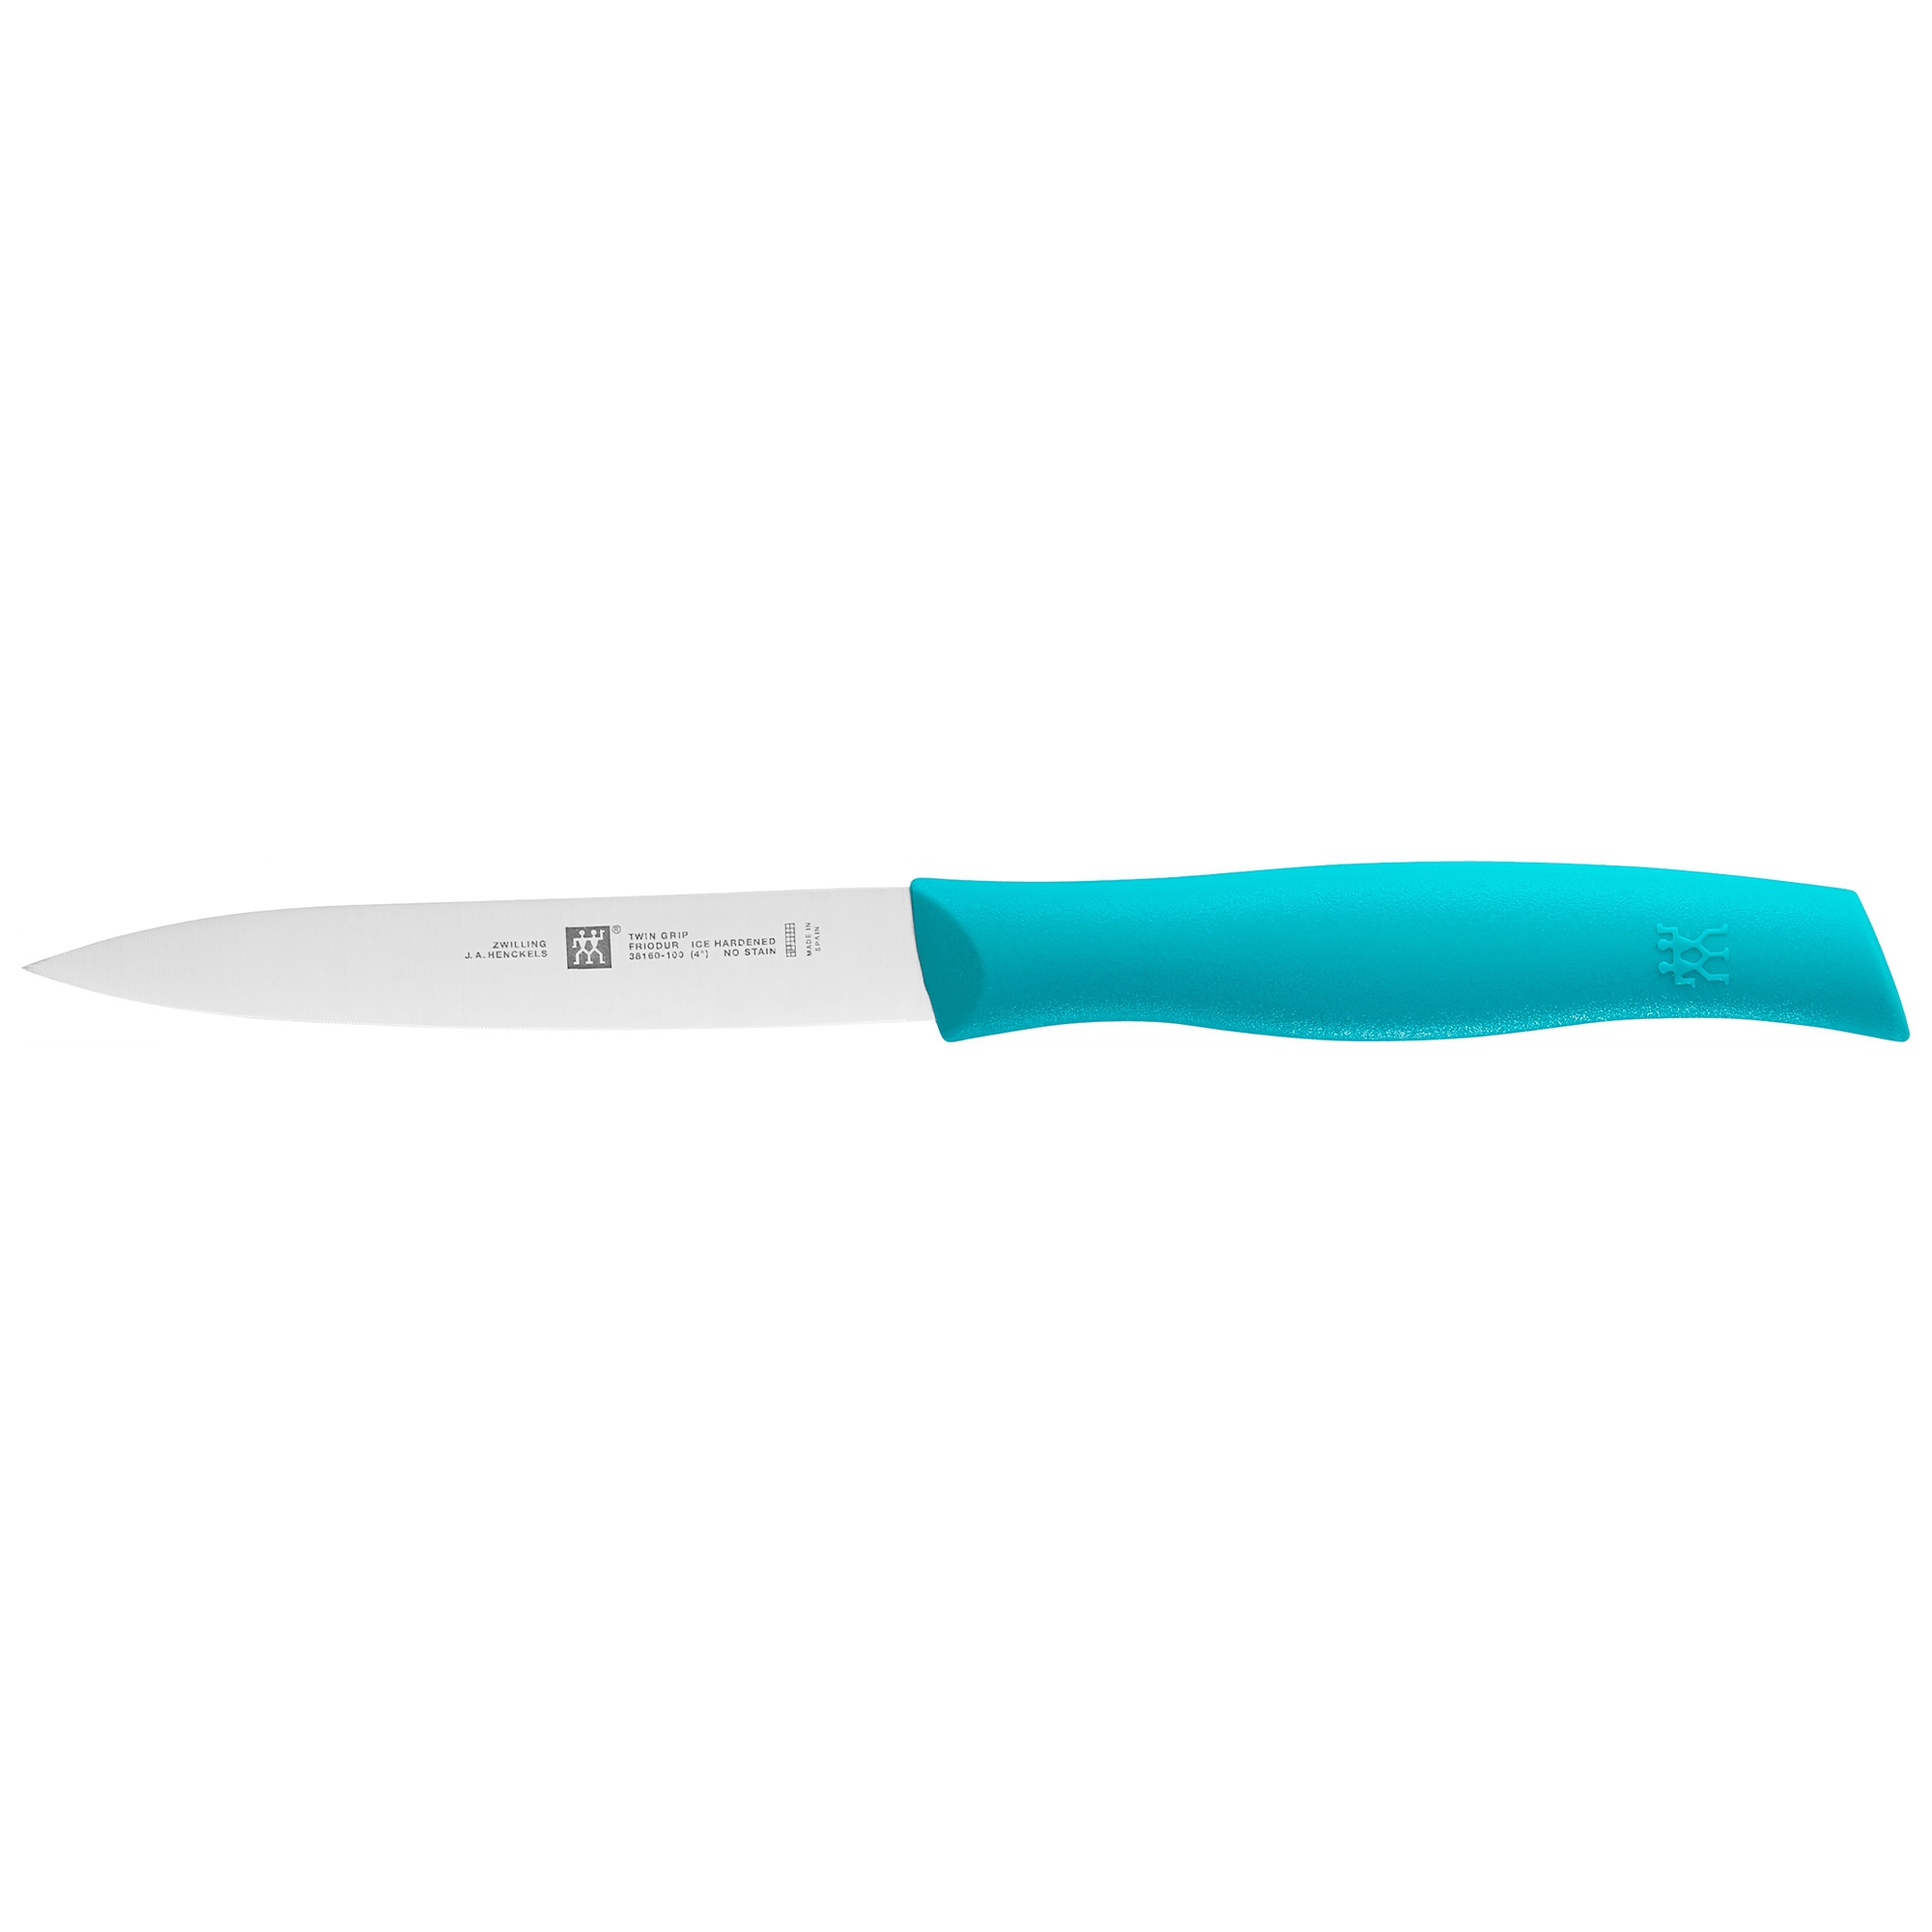 Zwilling - TWIN Grip 3-piece knife set, blue/pink/turqoise